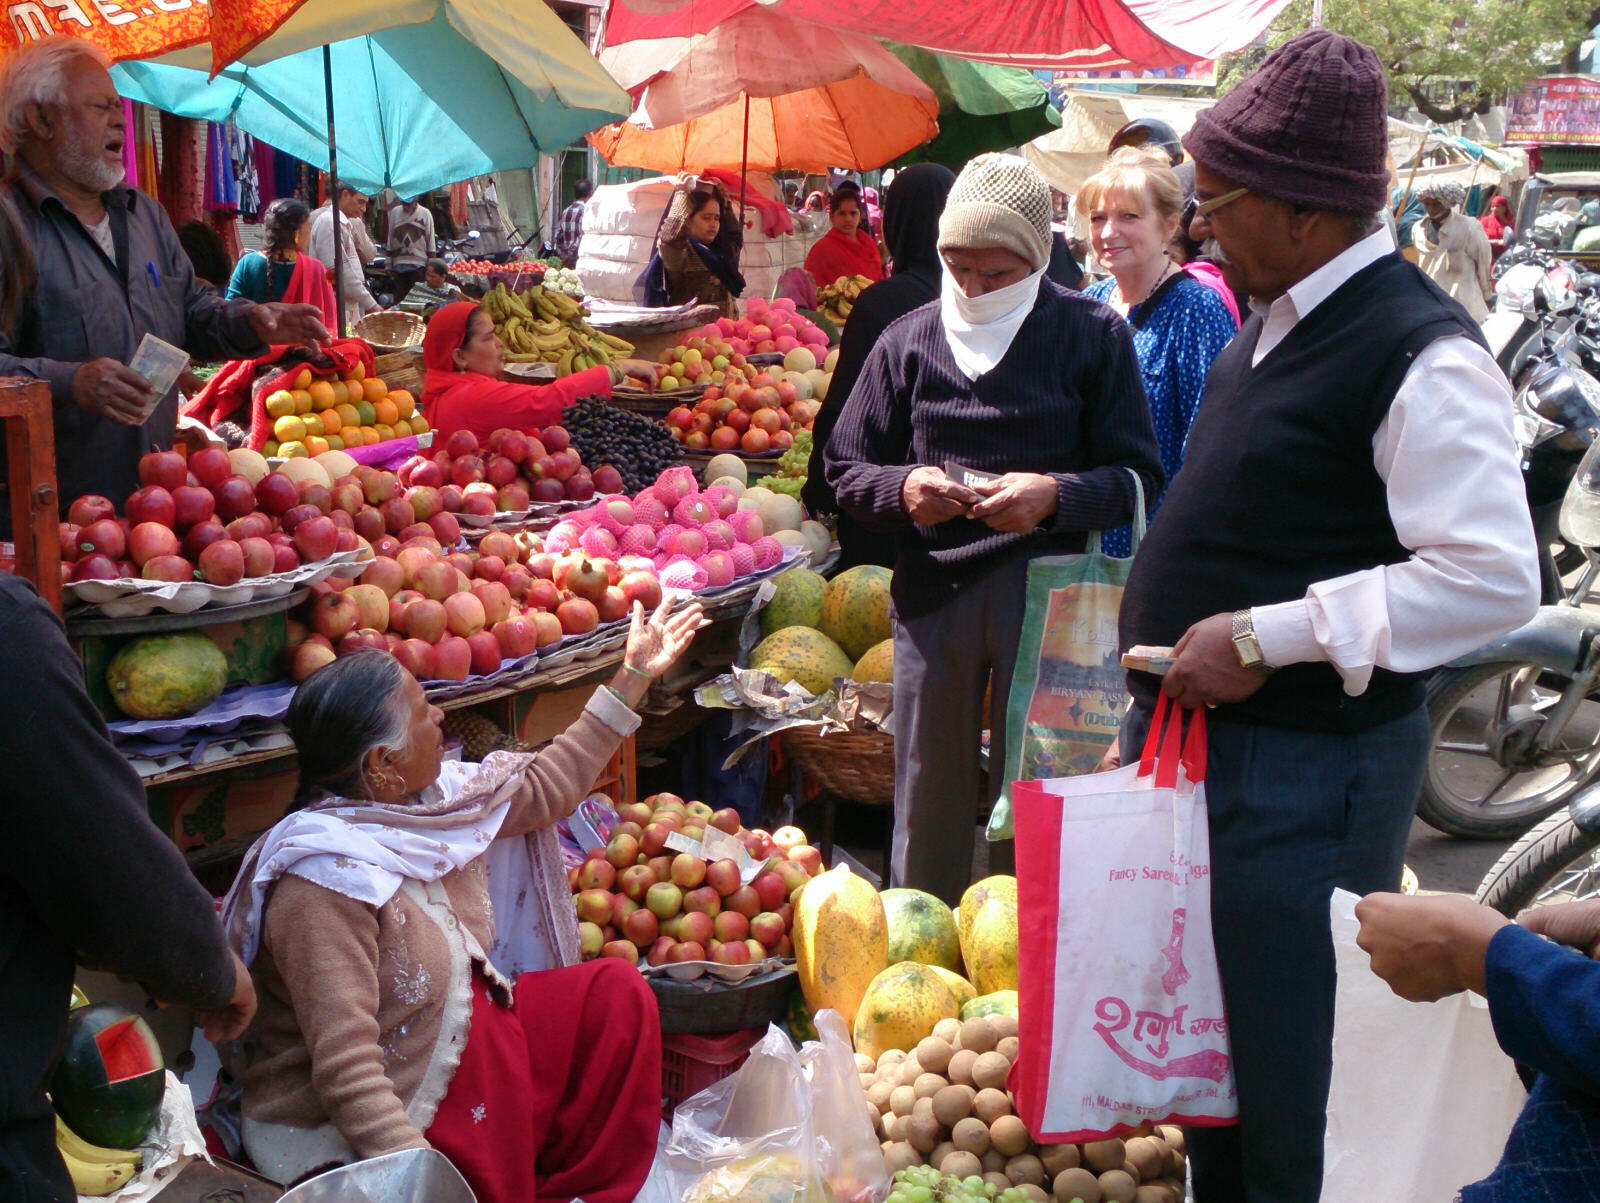 The fruit and veg market in Udaipur, Rajasthan